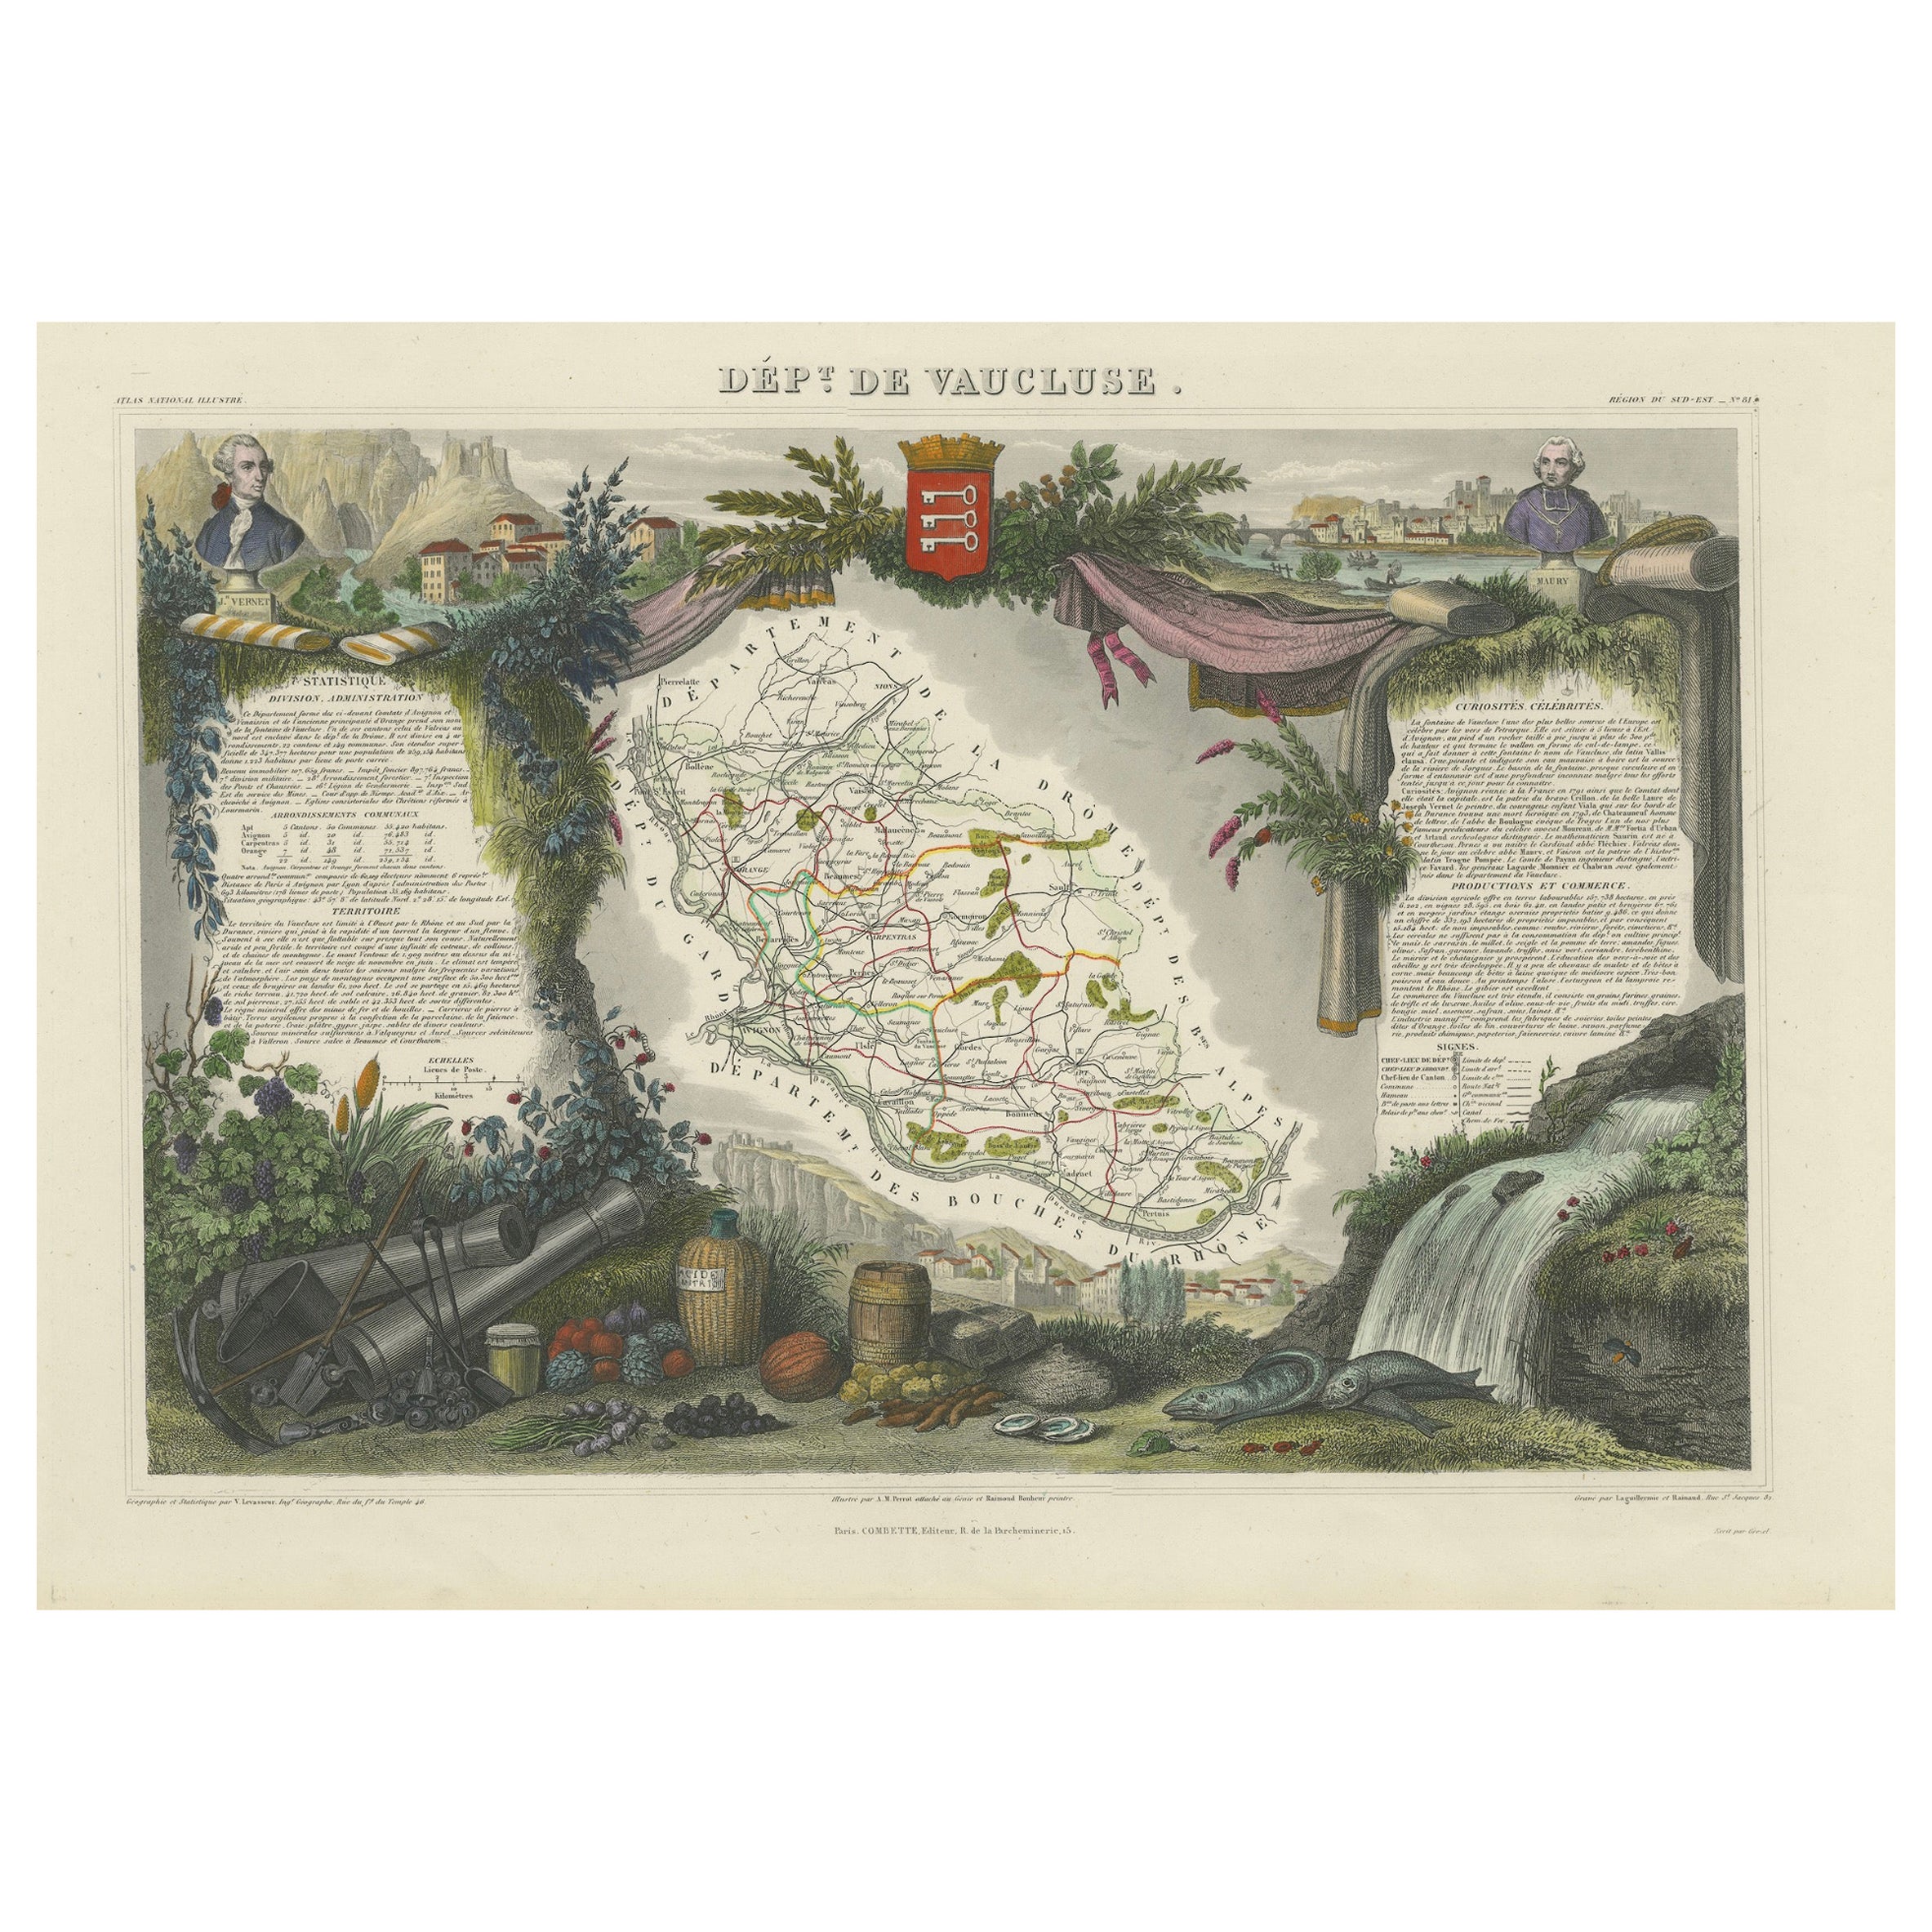 Old Map of Vaucluse, France : A Cartographic Celebration of Viticulture, 1852